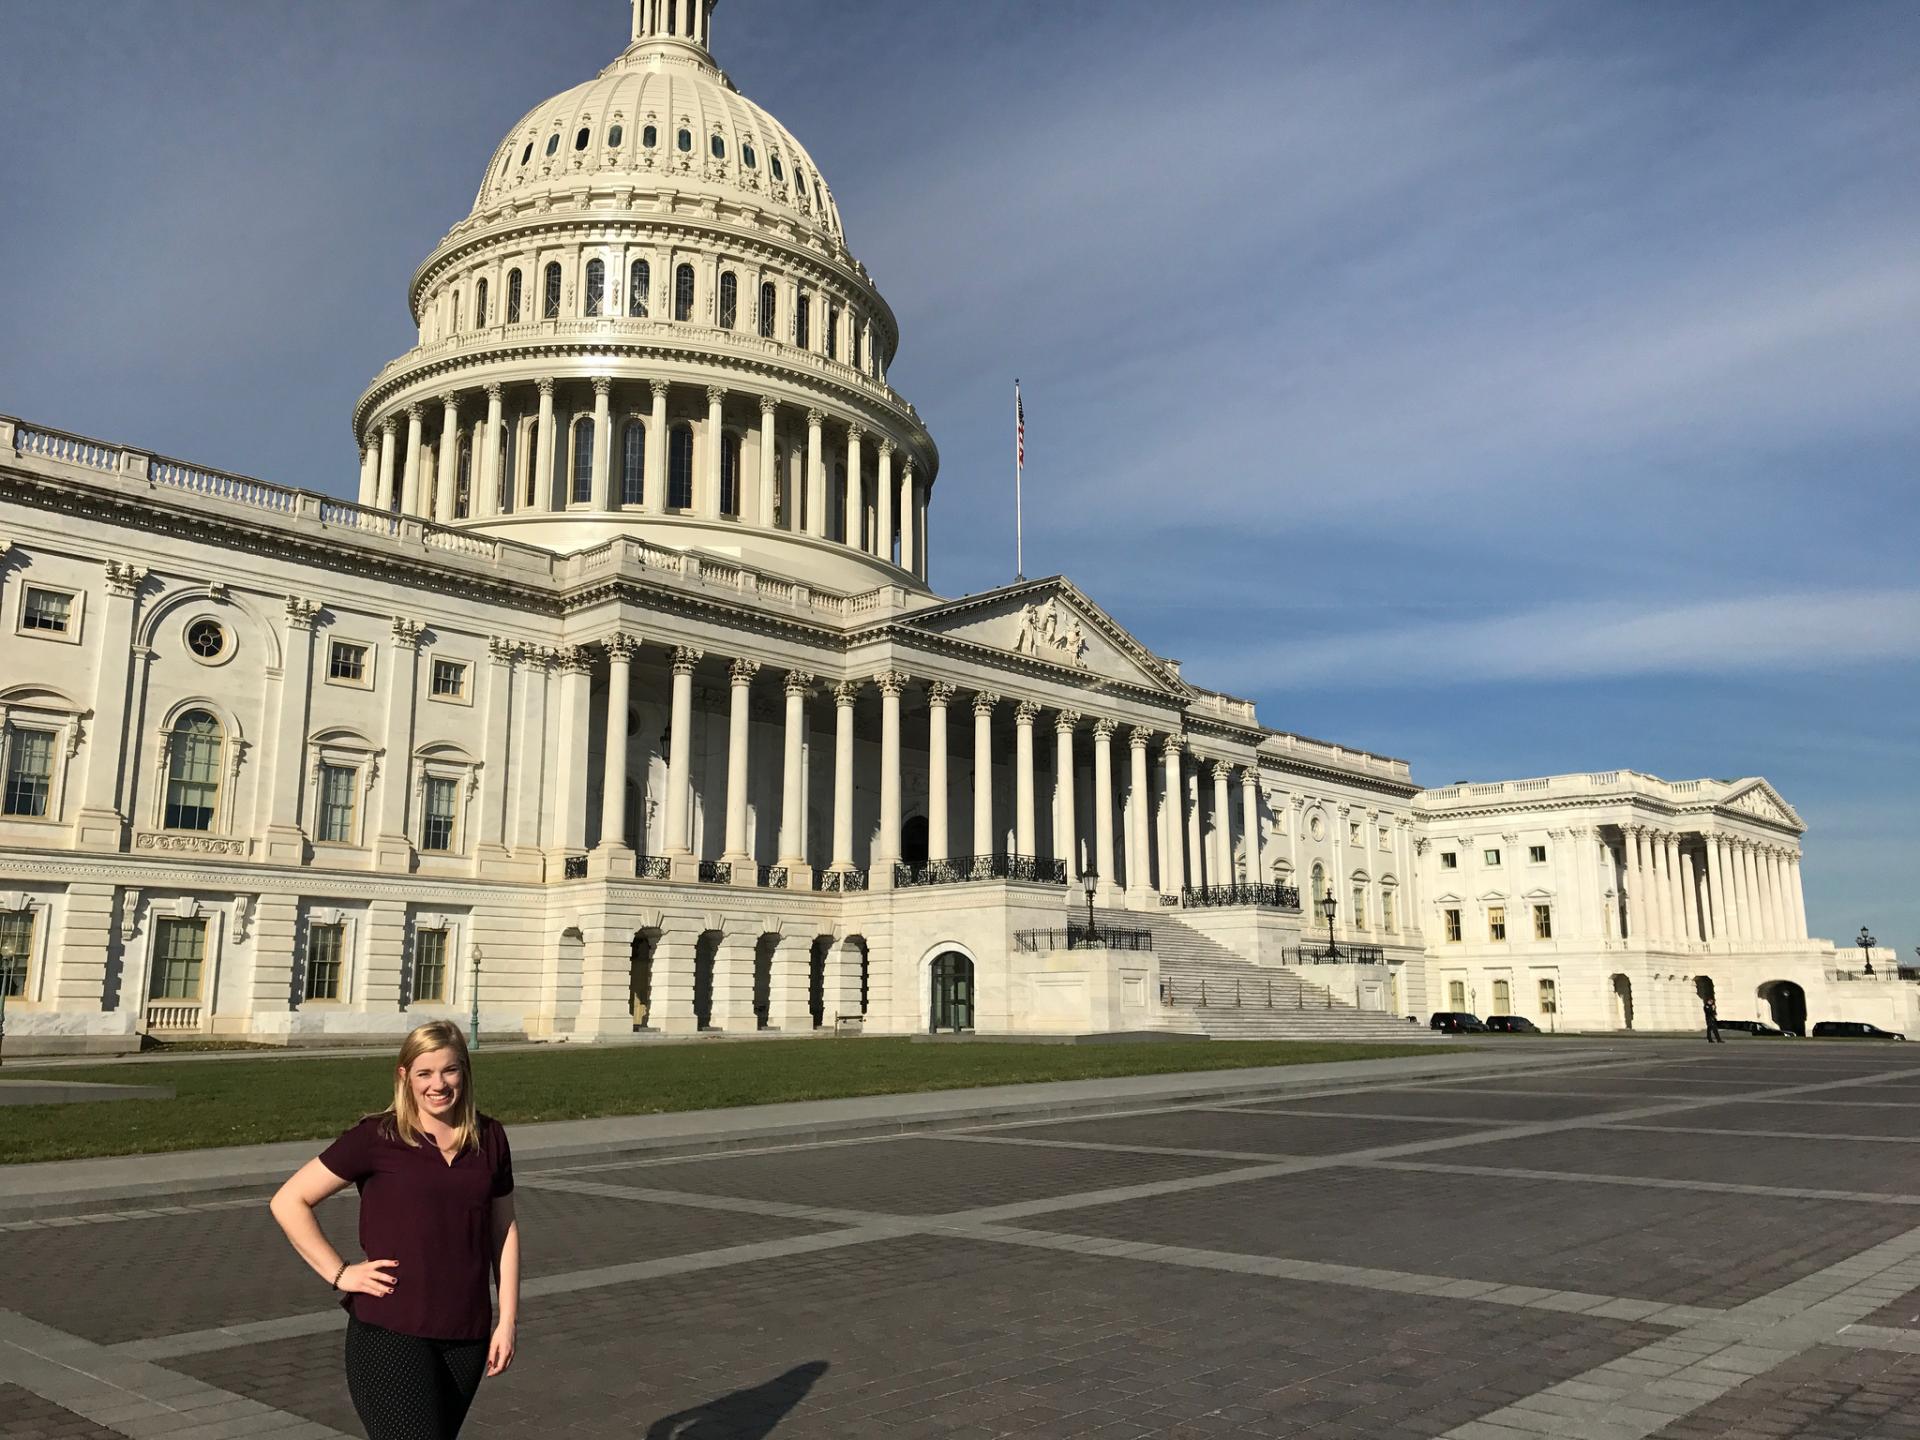 North Central College alumna Ashley Clayton standing in front of the U.S. Capitol.